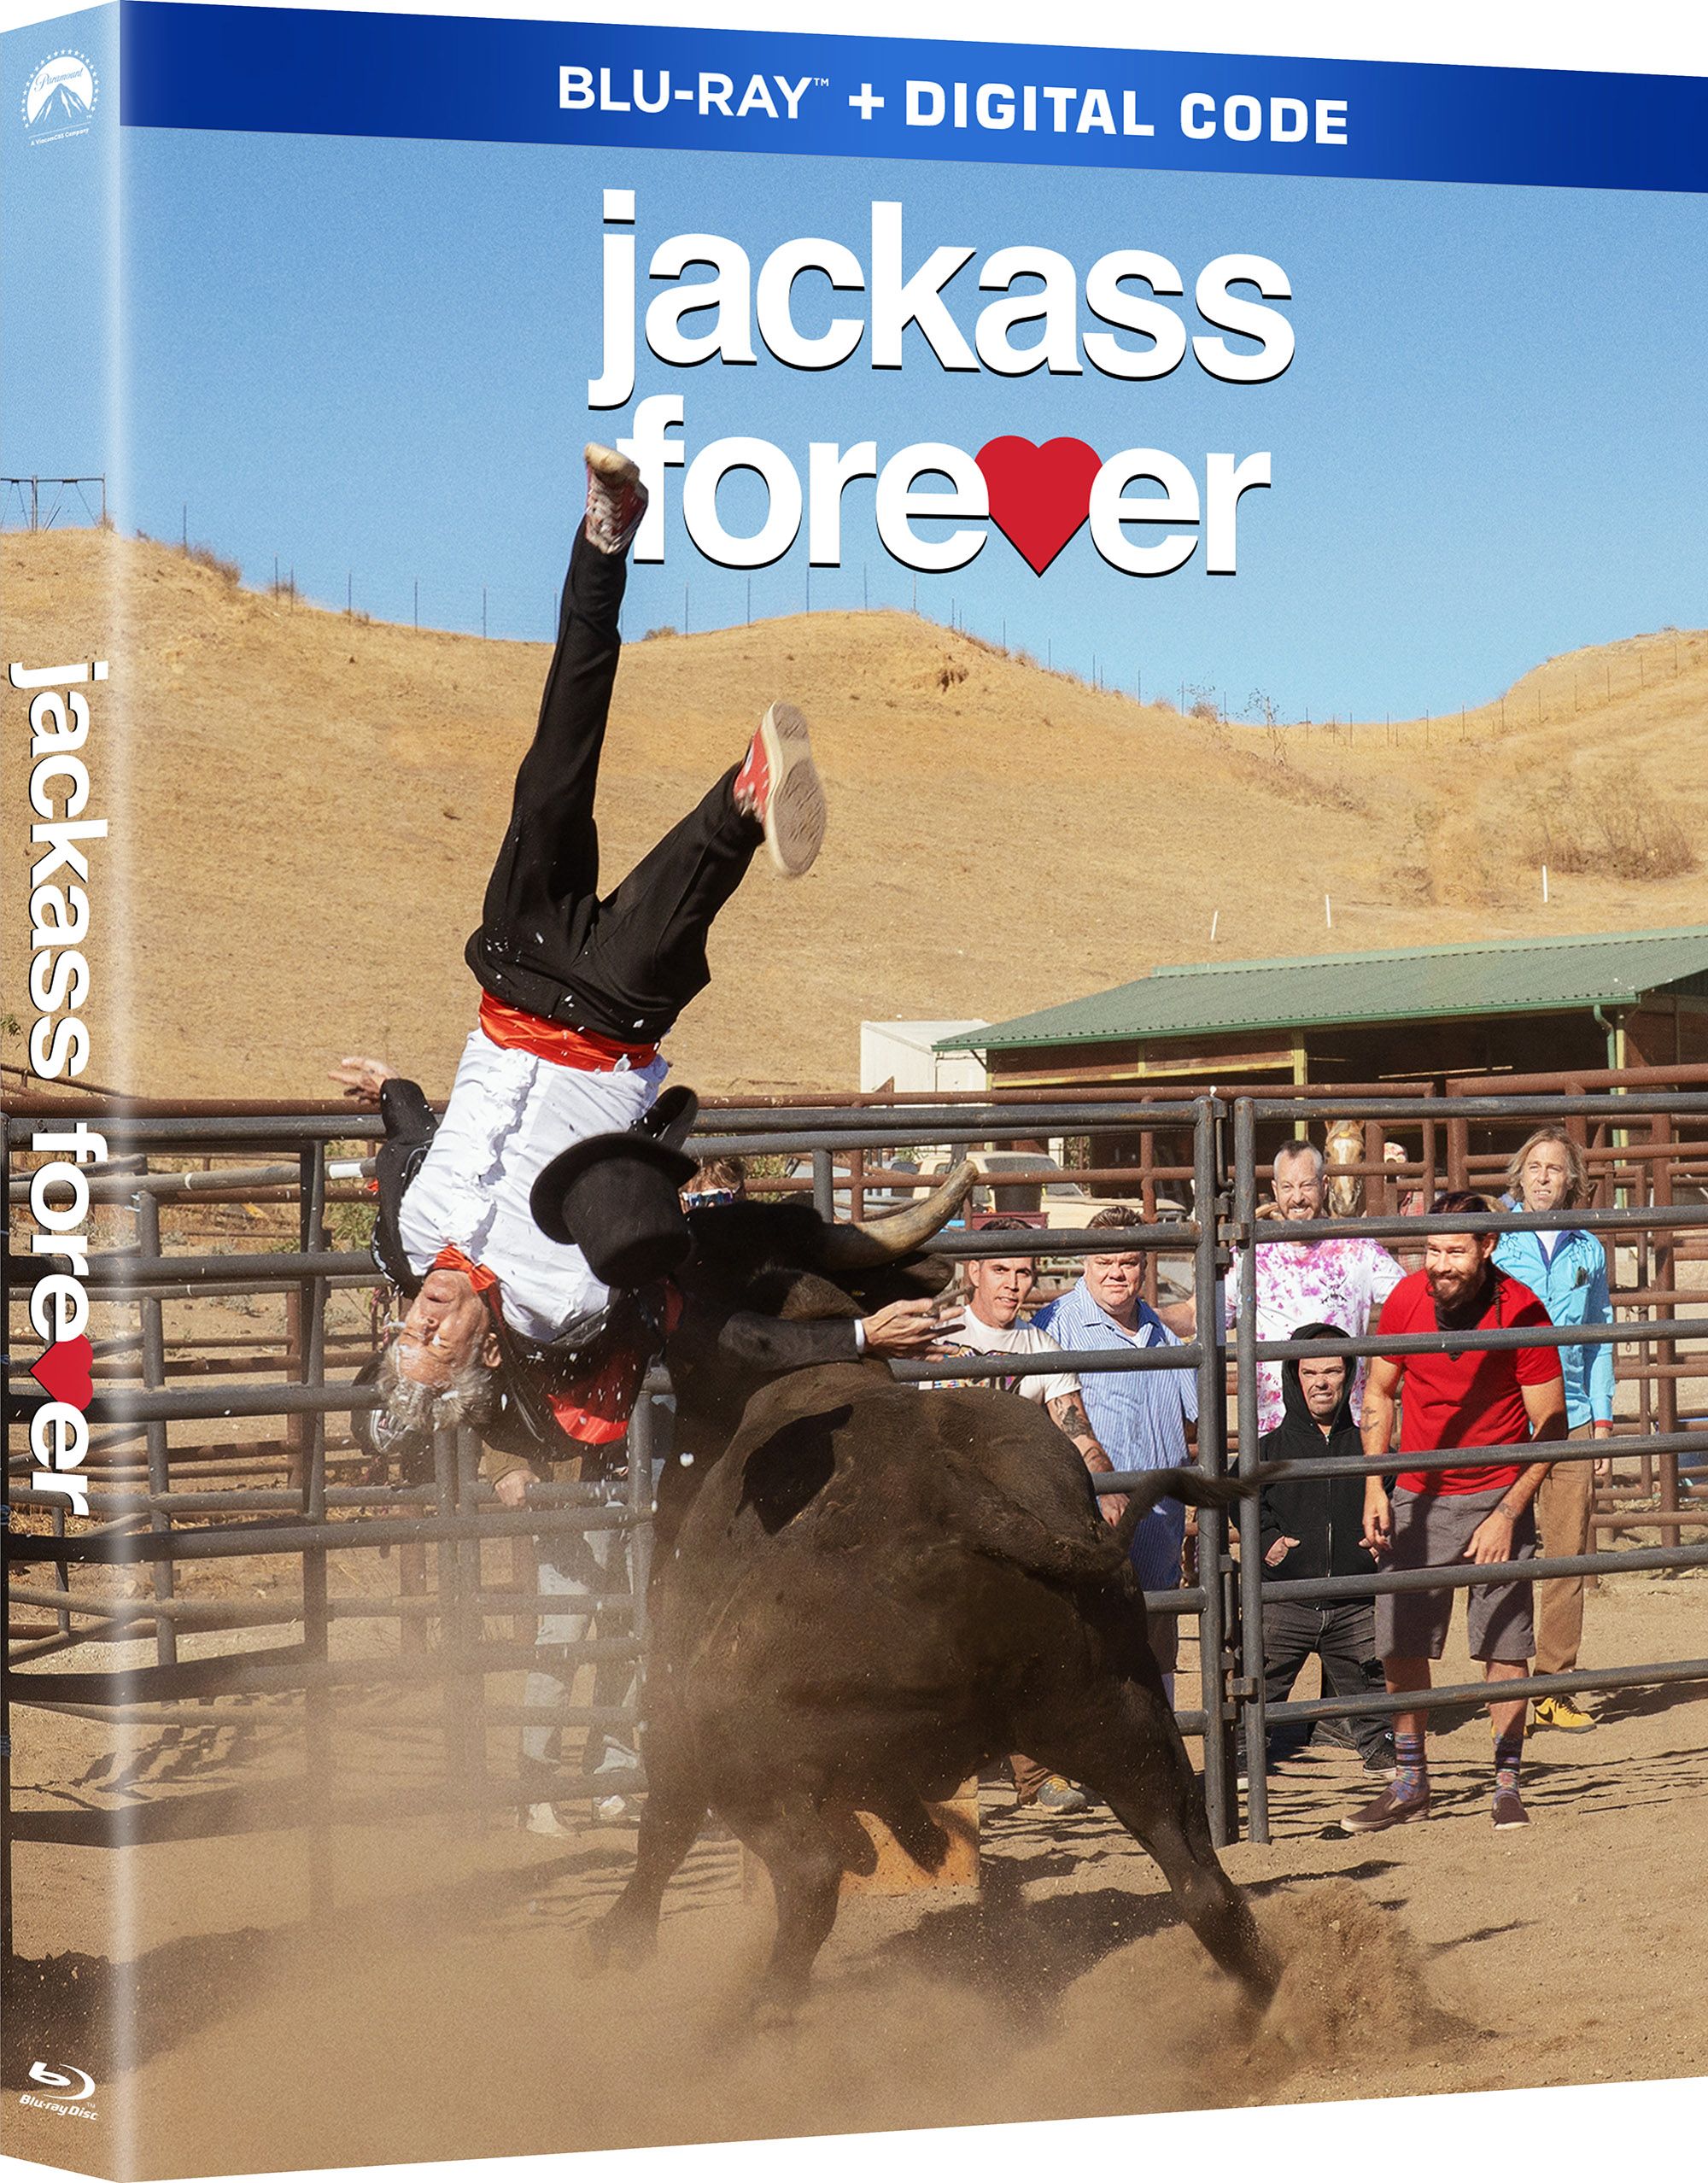 Jackass Forever Blu-ray Cover